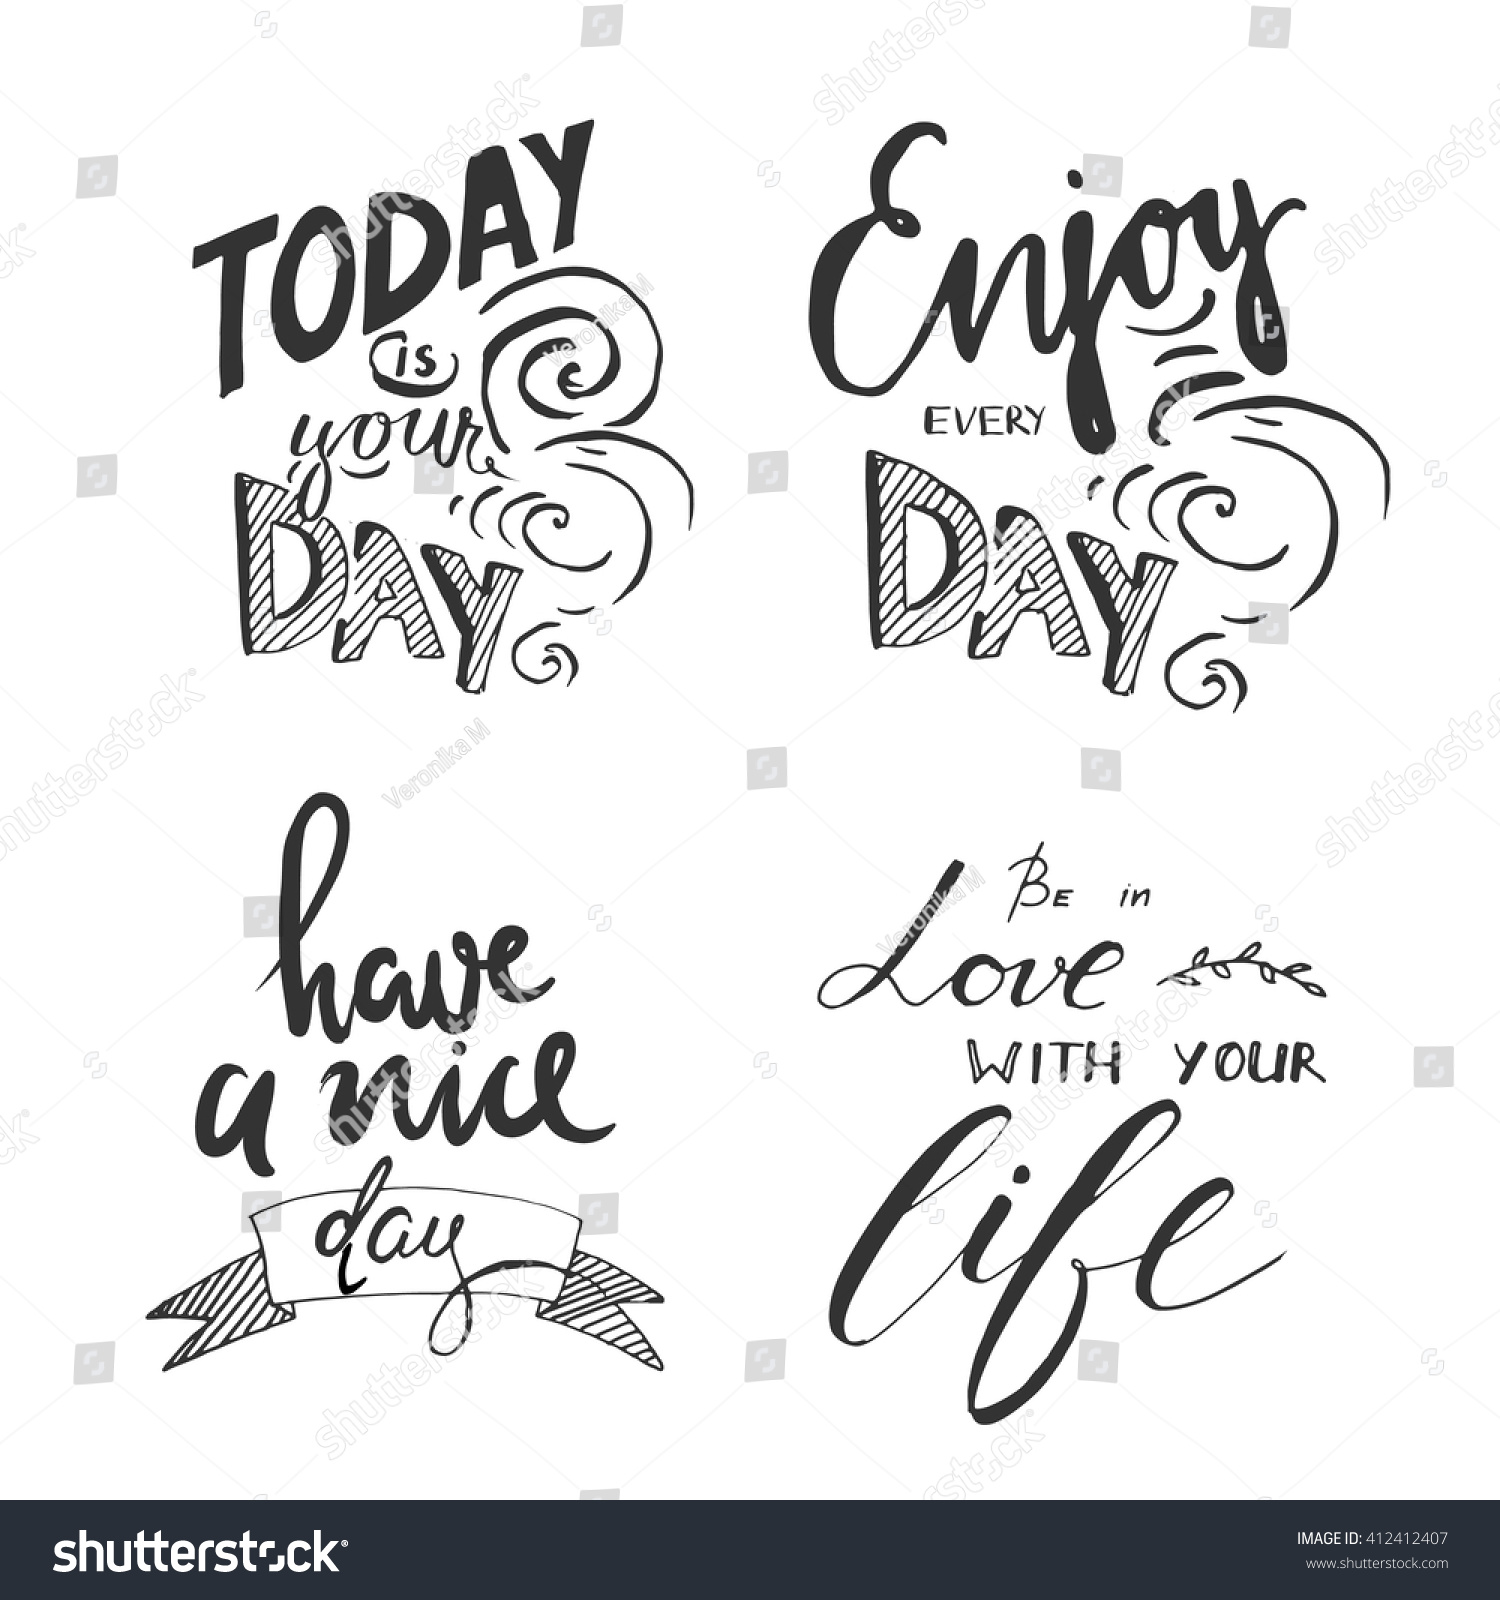 Today is your day Be in love with your life